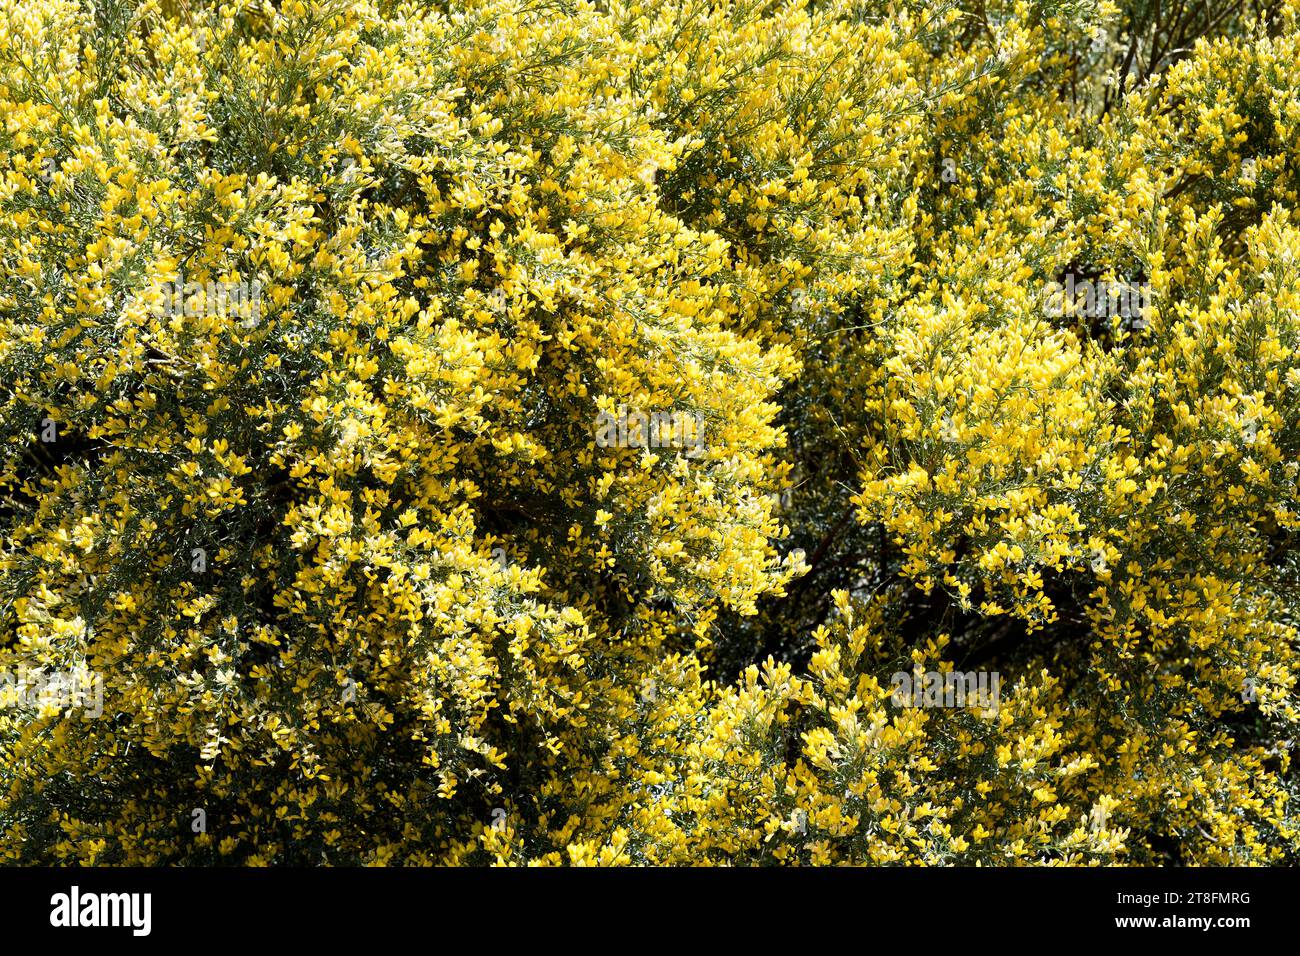 Hiniesta (Genista cinerascens or Genista cinerea cinerascens) is a shrub endemic to west and center Iberian Peninsula. This photo was taken in Pico Vi Stock Photo